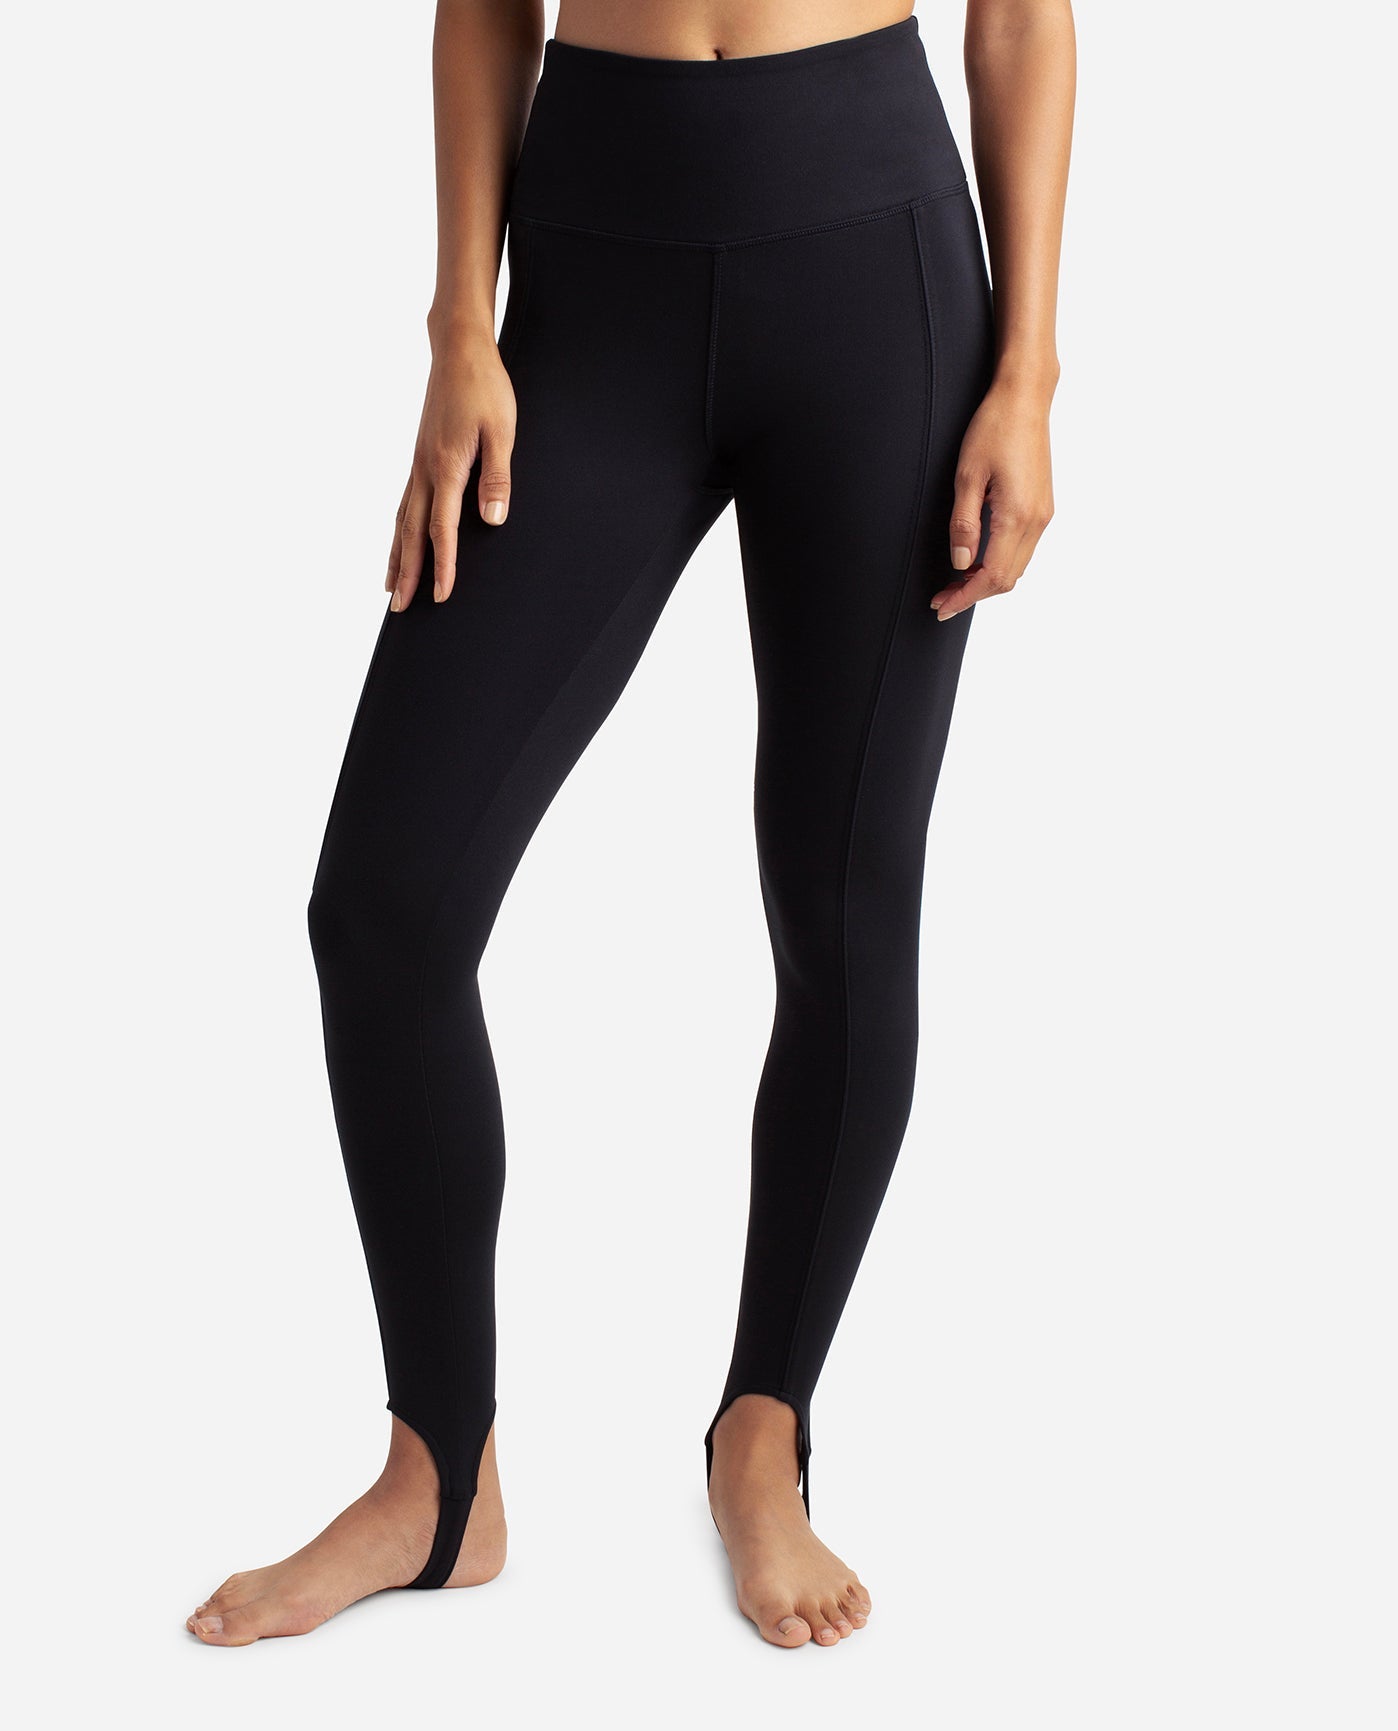 Women's knitted stirrup leggings | 4F: Sportswear and shoes